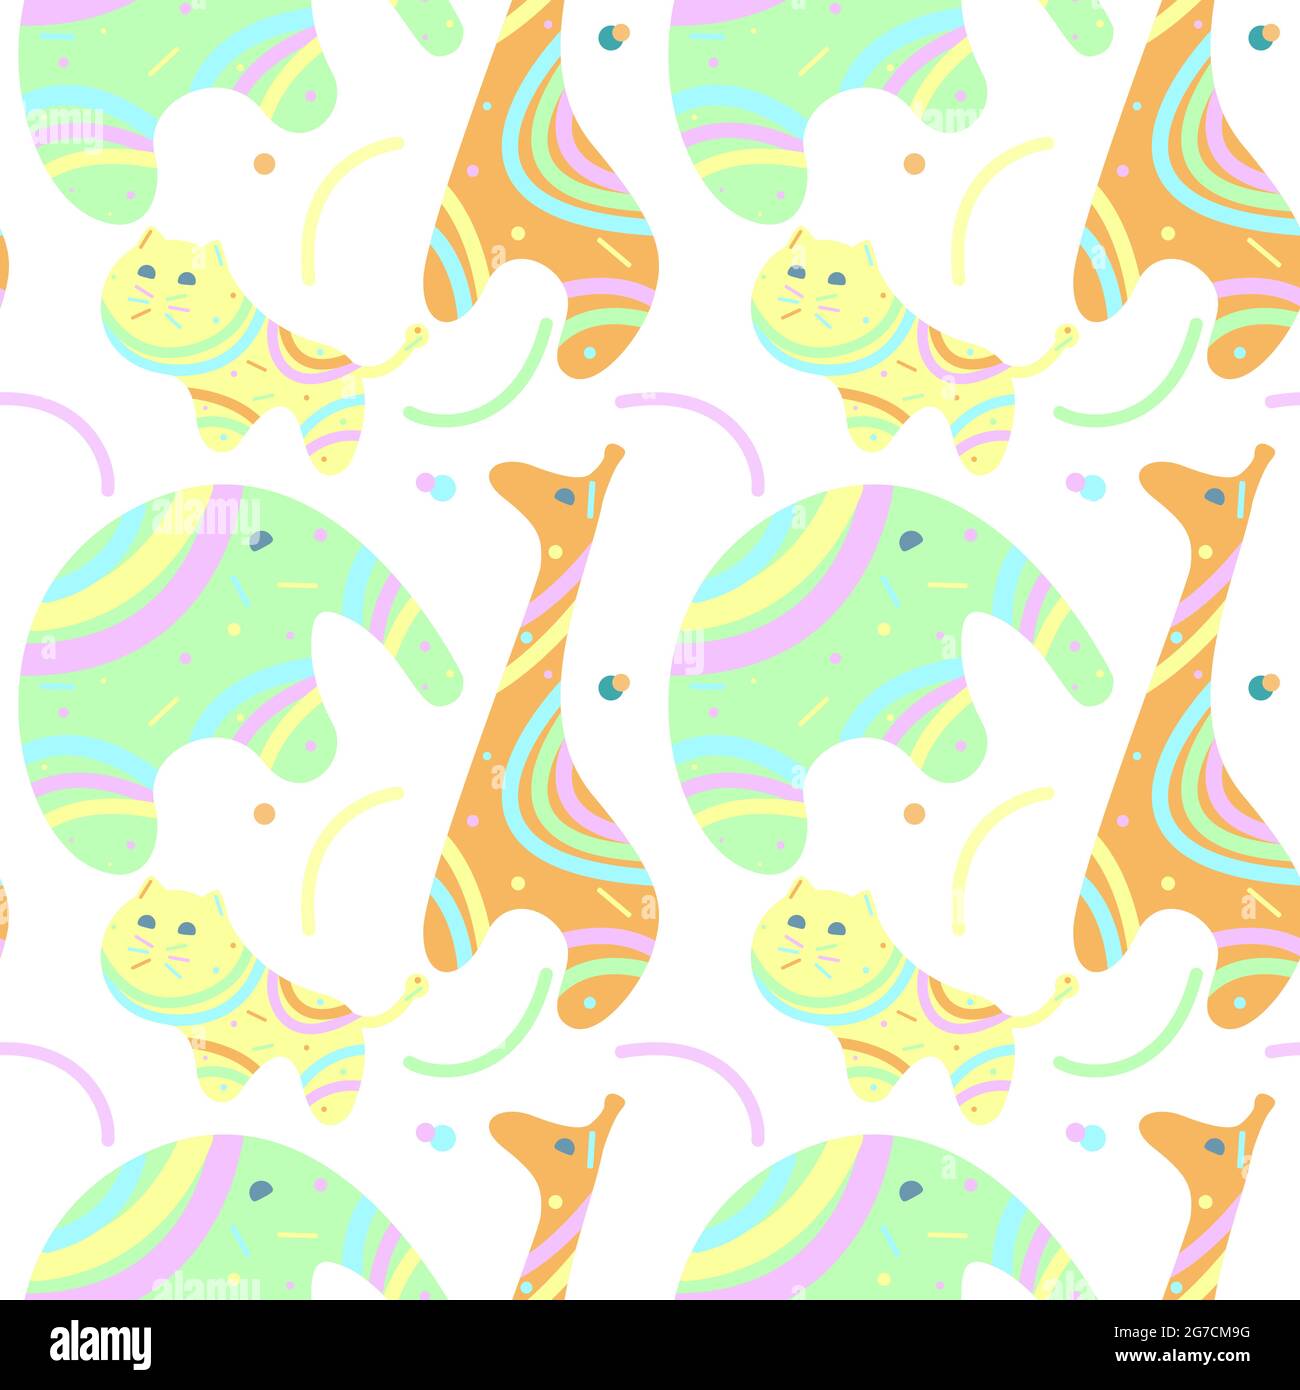 Children pattern with toy animals giraffe tiger elephant, pastel colors, seamless. For textiles covers backdrops backgrounds wrappers packaging labels. Vector illustration Stock Vector